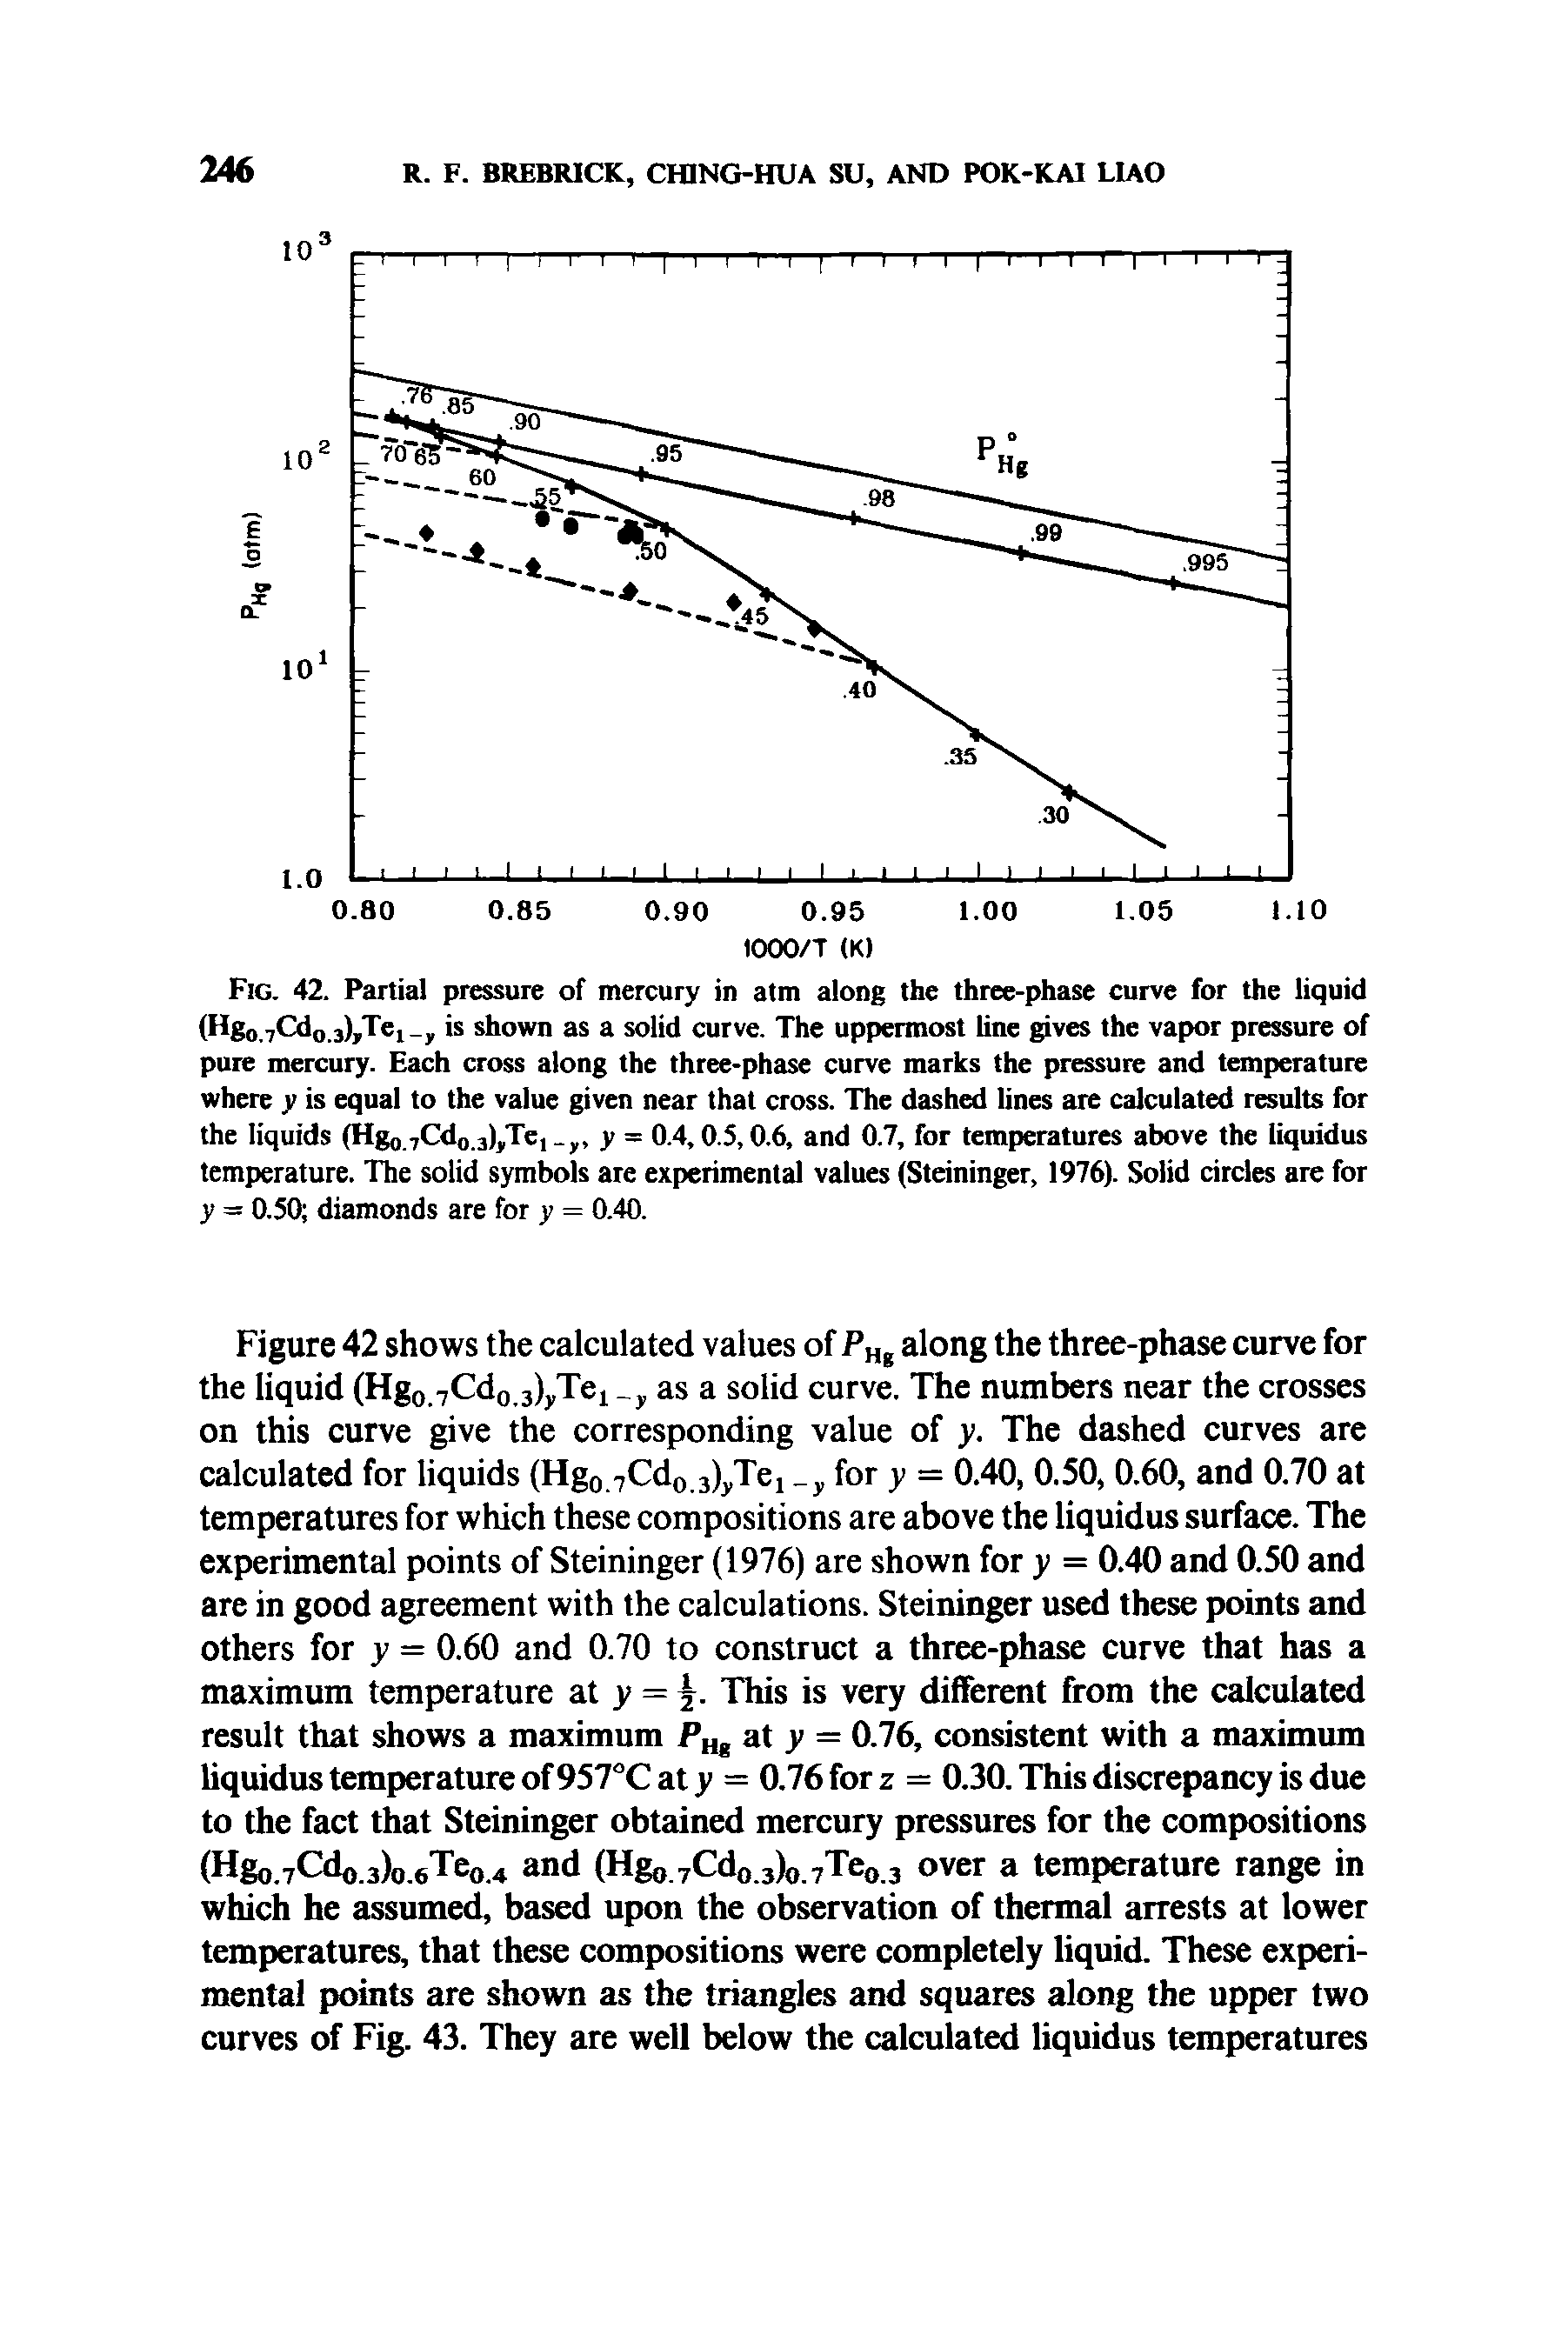 Fig. 42. Partial pressure of mercury in atm along the three-phase curve for the liquid (Hg0 7Cd0 3)JTe1 y is shown as a solid curve. The uppermost line gives the vapor pressure of pure mercury. Each cross along the three-phase curve marks the pressure and temperature where is equal to the value given near that cross. The dashed lines are calculated results for the liquids (Hg0 7Cd0.3),Te, = 0.4,0.5,0.6, and 0.7, for temperatures above the liquidus temperature. The solid symbols are experimental values (Steininger, 1976). Solid circles are for = 0.50 diamonds are for = 0.40.